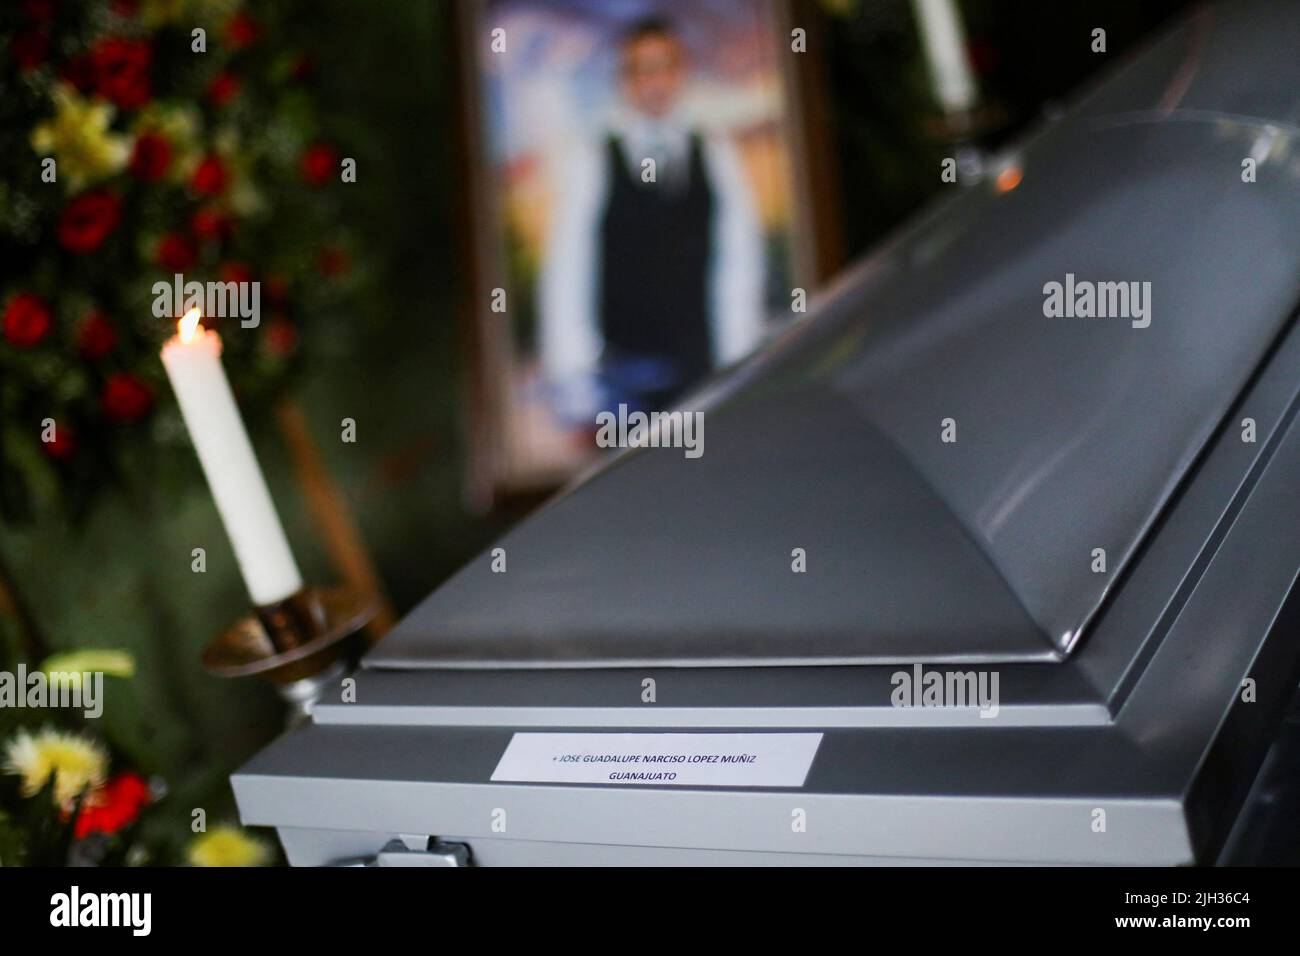 The name of late migrant Jose Lopez, 34, is written on his coffin during his wake after being repatriated from San Antonio, Texas, U.S., at his family's home in Celaya, in Guanajuato state, Mexico July 14, 2022. REUTERS/Edgard Garrido Stock Photo